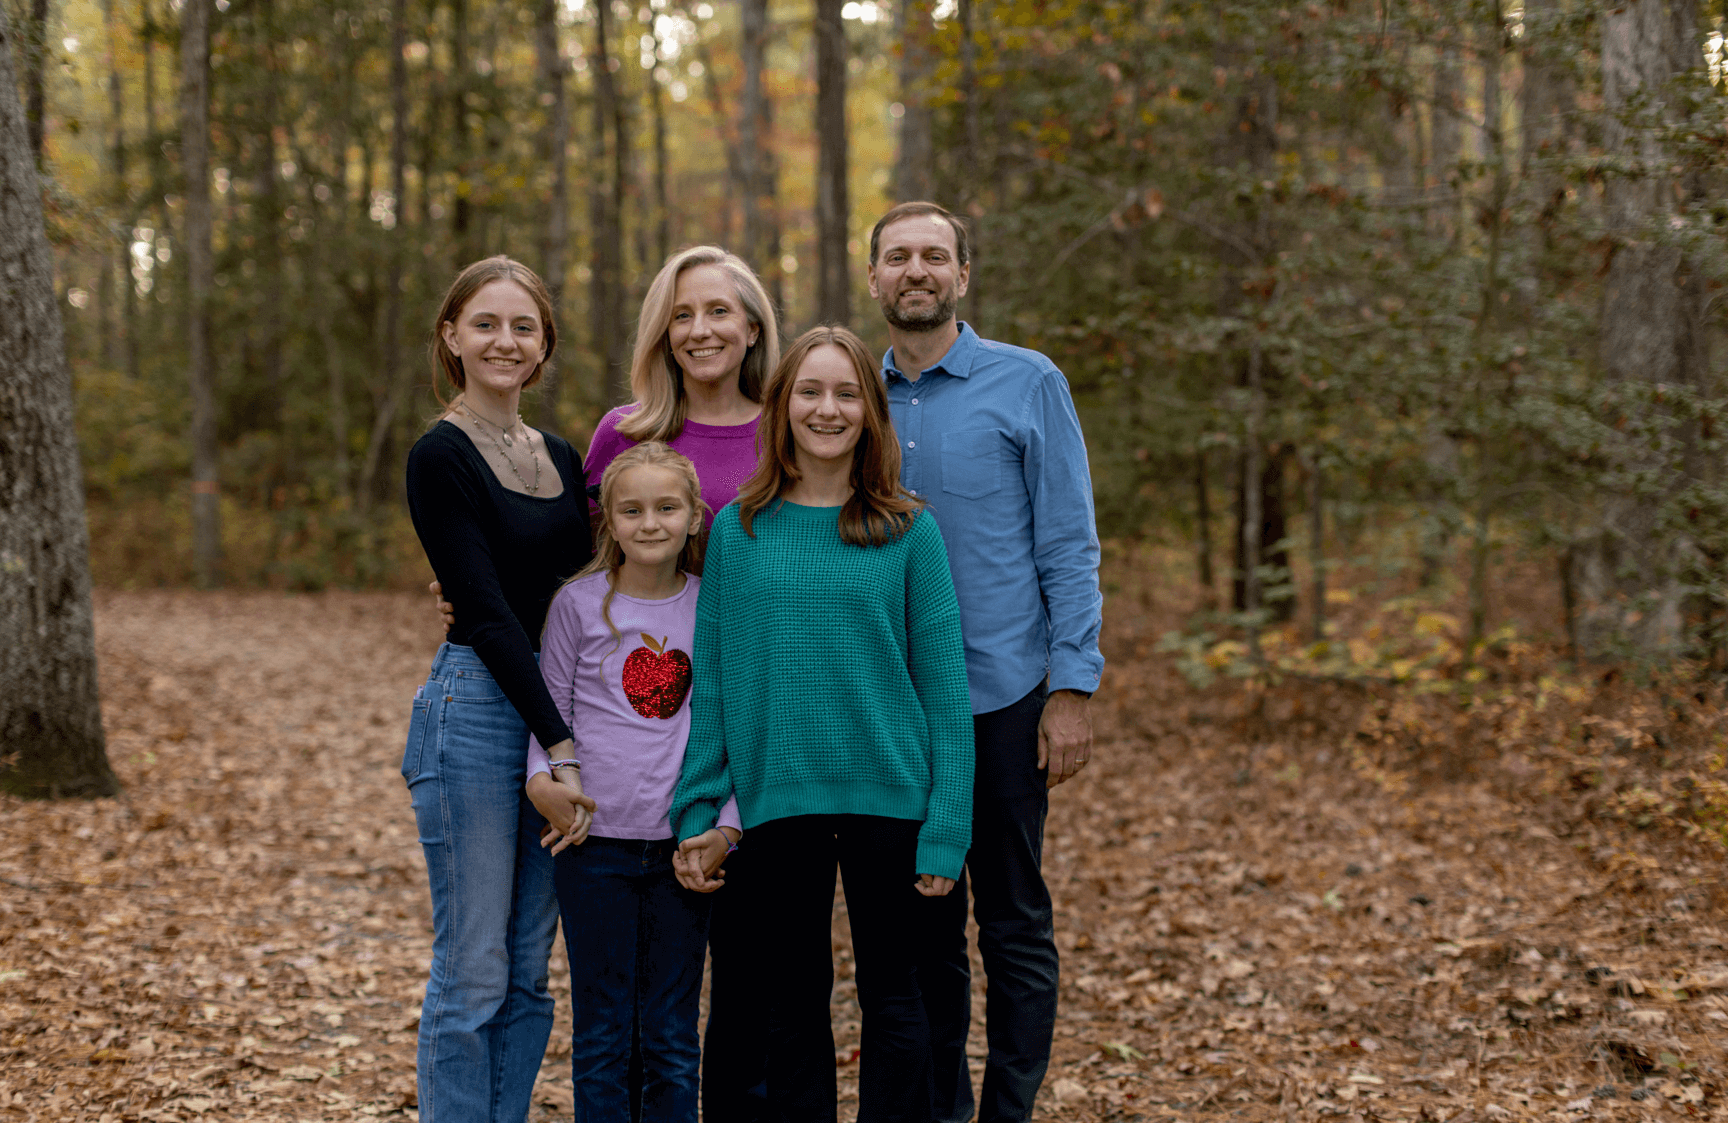 Abigail Spanberger is raising her family in Virginia, where she grew up and where her husband was born and raised. As Governor, she will focus on lowering costs for every Virginia family, supporting Virginia's public schools, and making sure the next generation of Virginians can succeed.